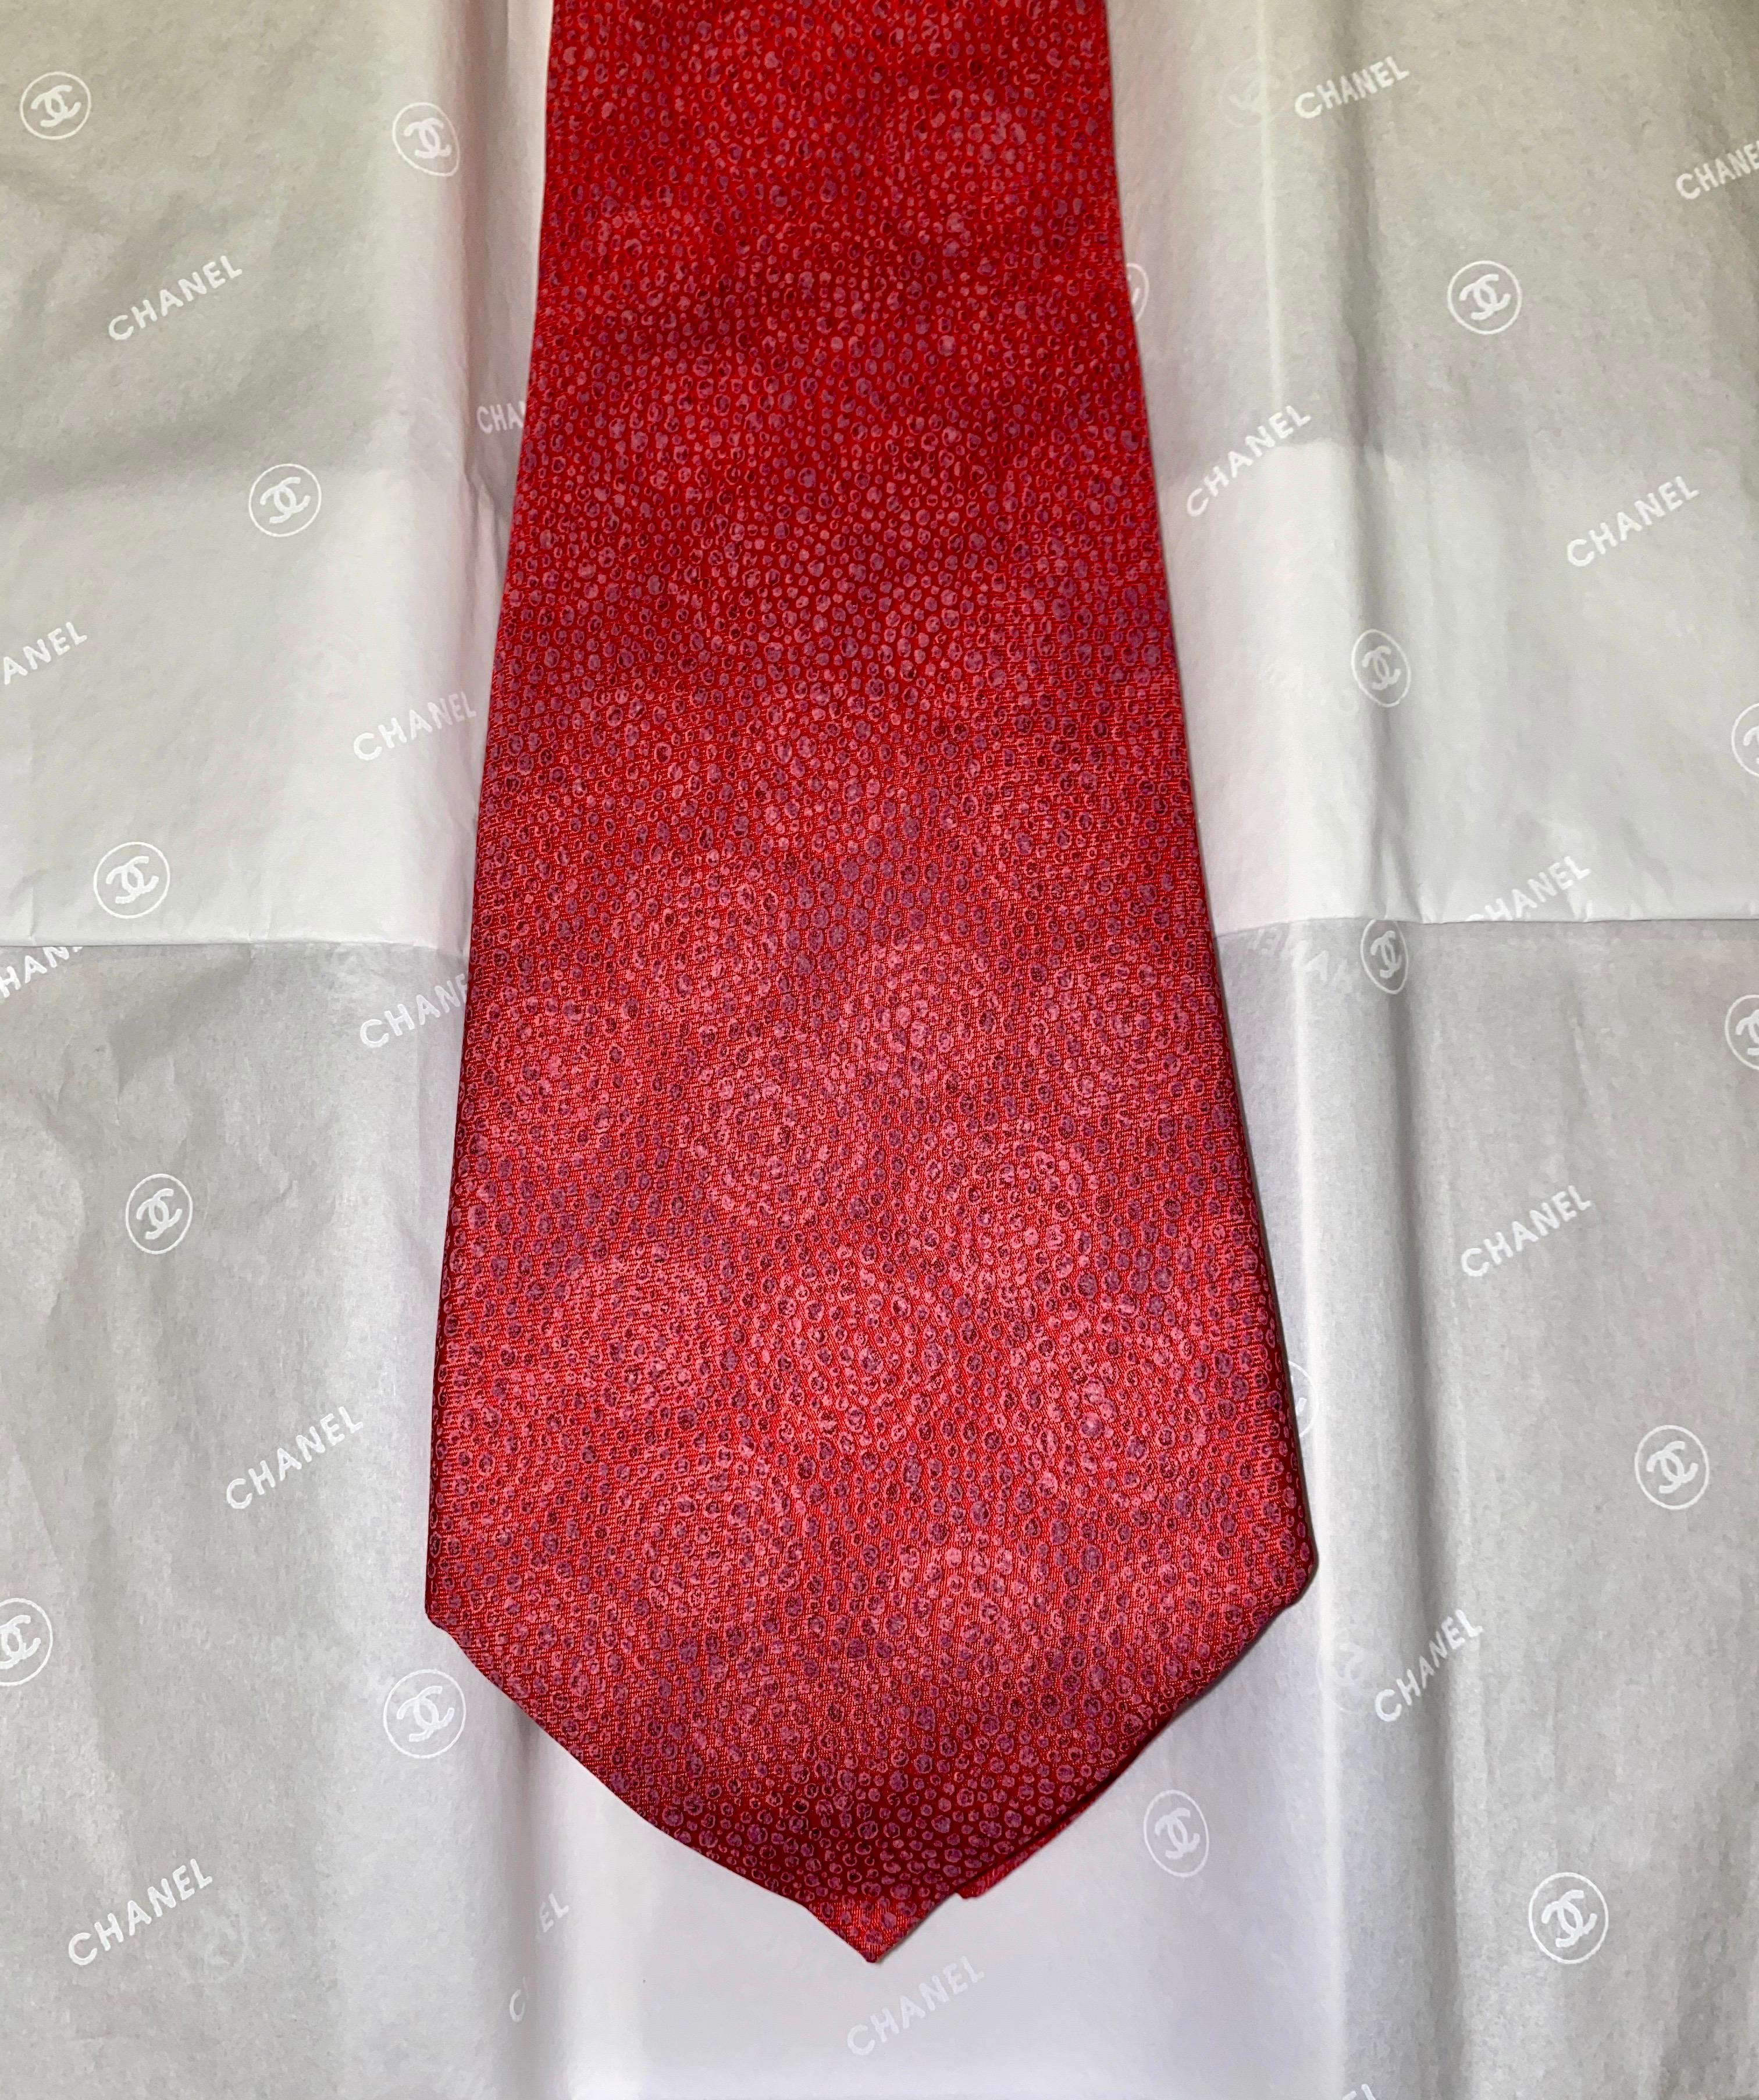 Beautiful CHANEL silk tie
A true signature item that will last you for many years
Chanel's famous Camellia motif
Chain on back
100% Silk
Handmade in Italy
Brandnew, never worn
Comes in original CHANEL tie box